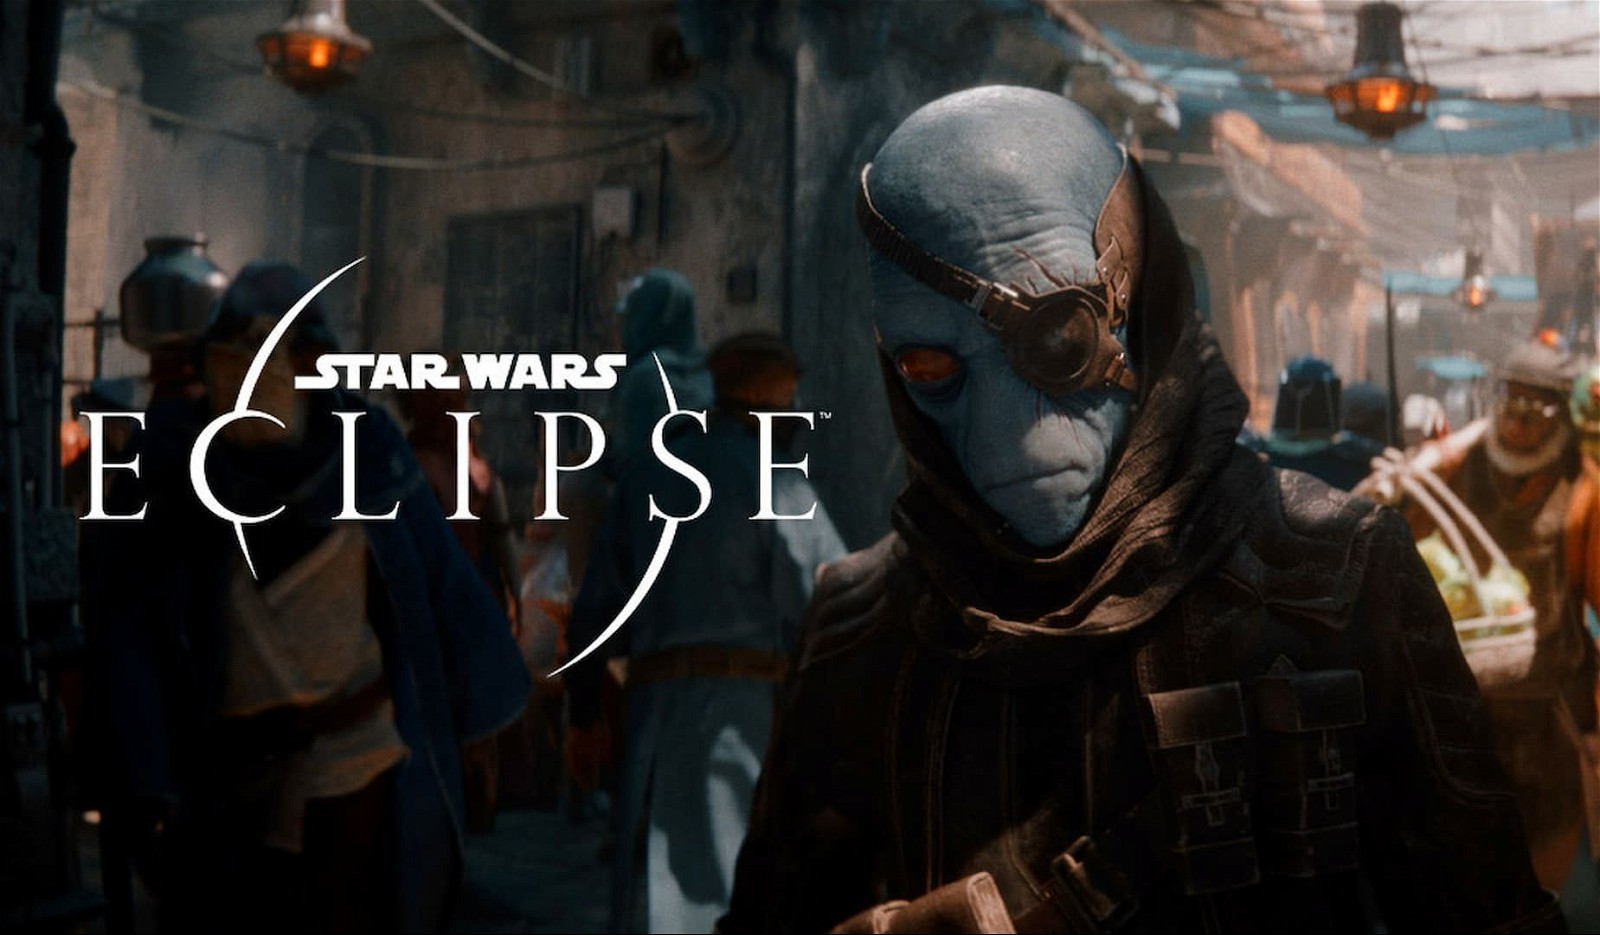 Star Wars Eclipse is currently in development and it is going smoothly